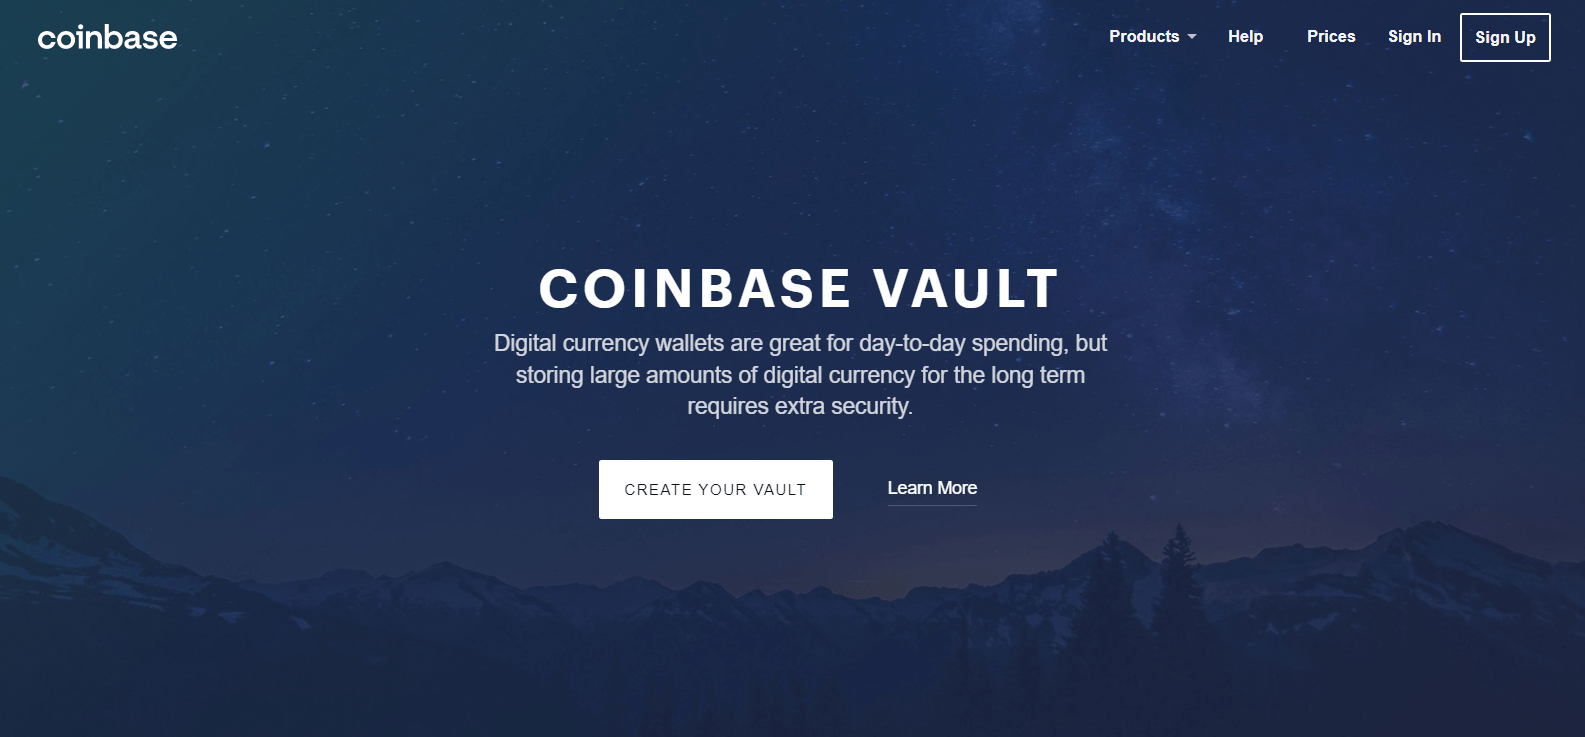 Coinbase Vault page